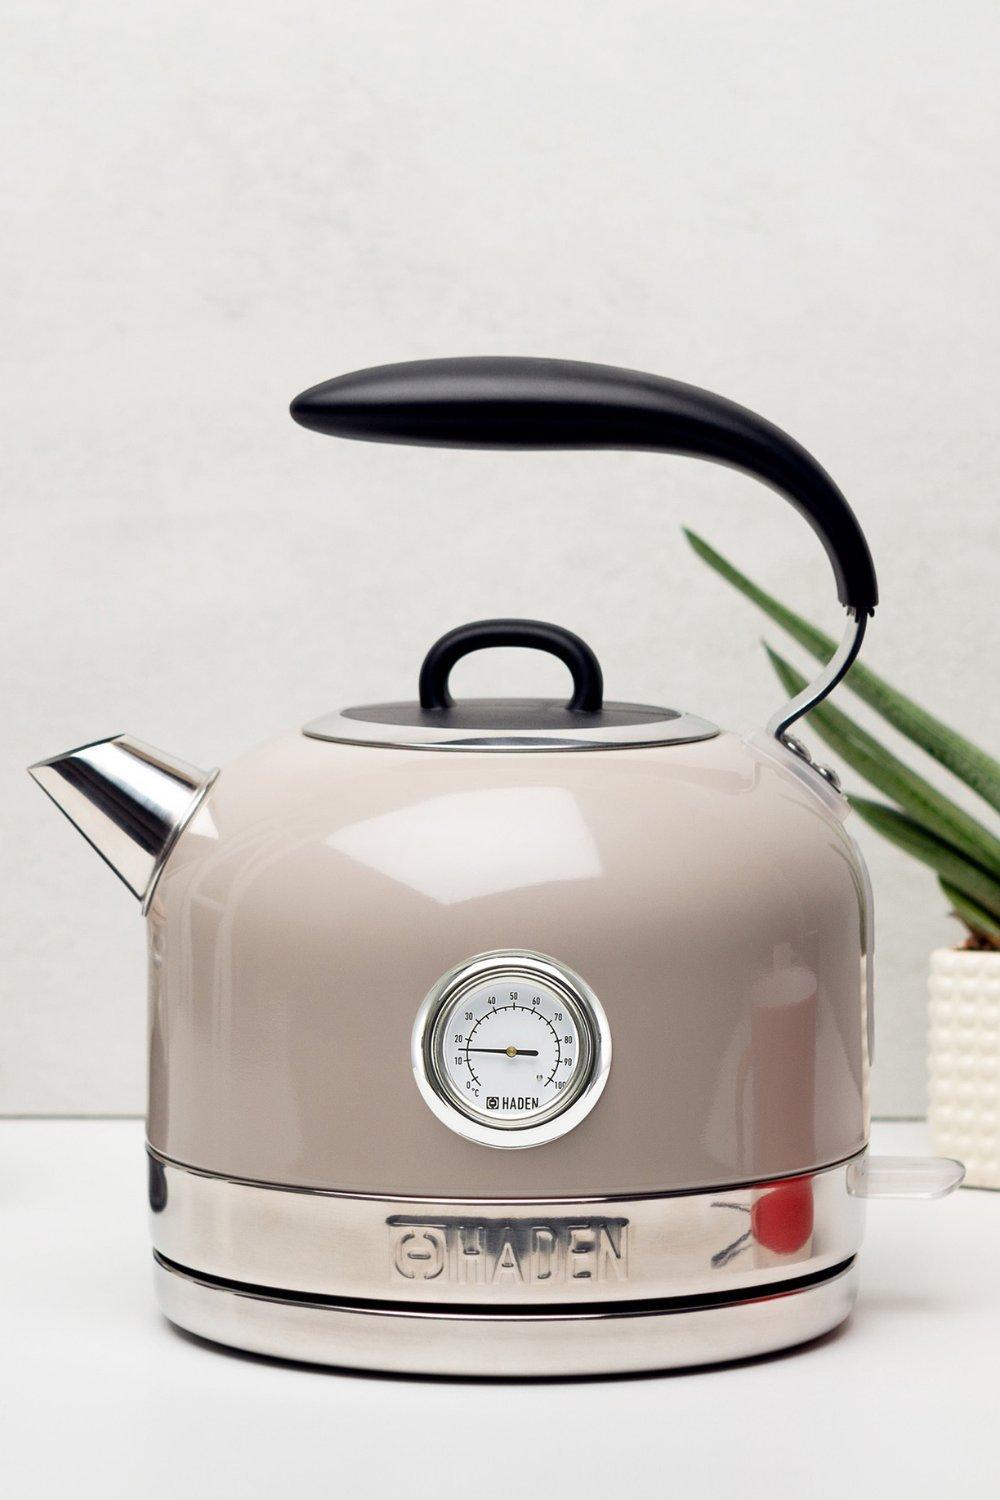 Jersey Traditional Electric Fast Boil Kettle